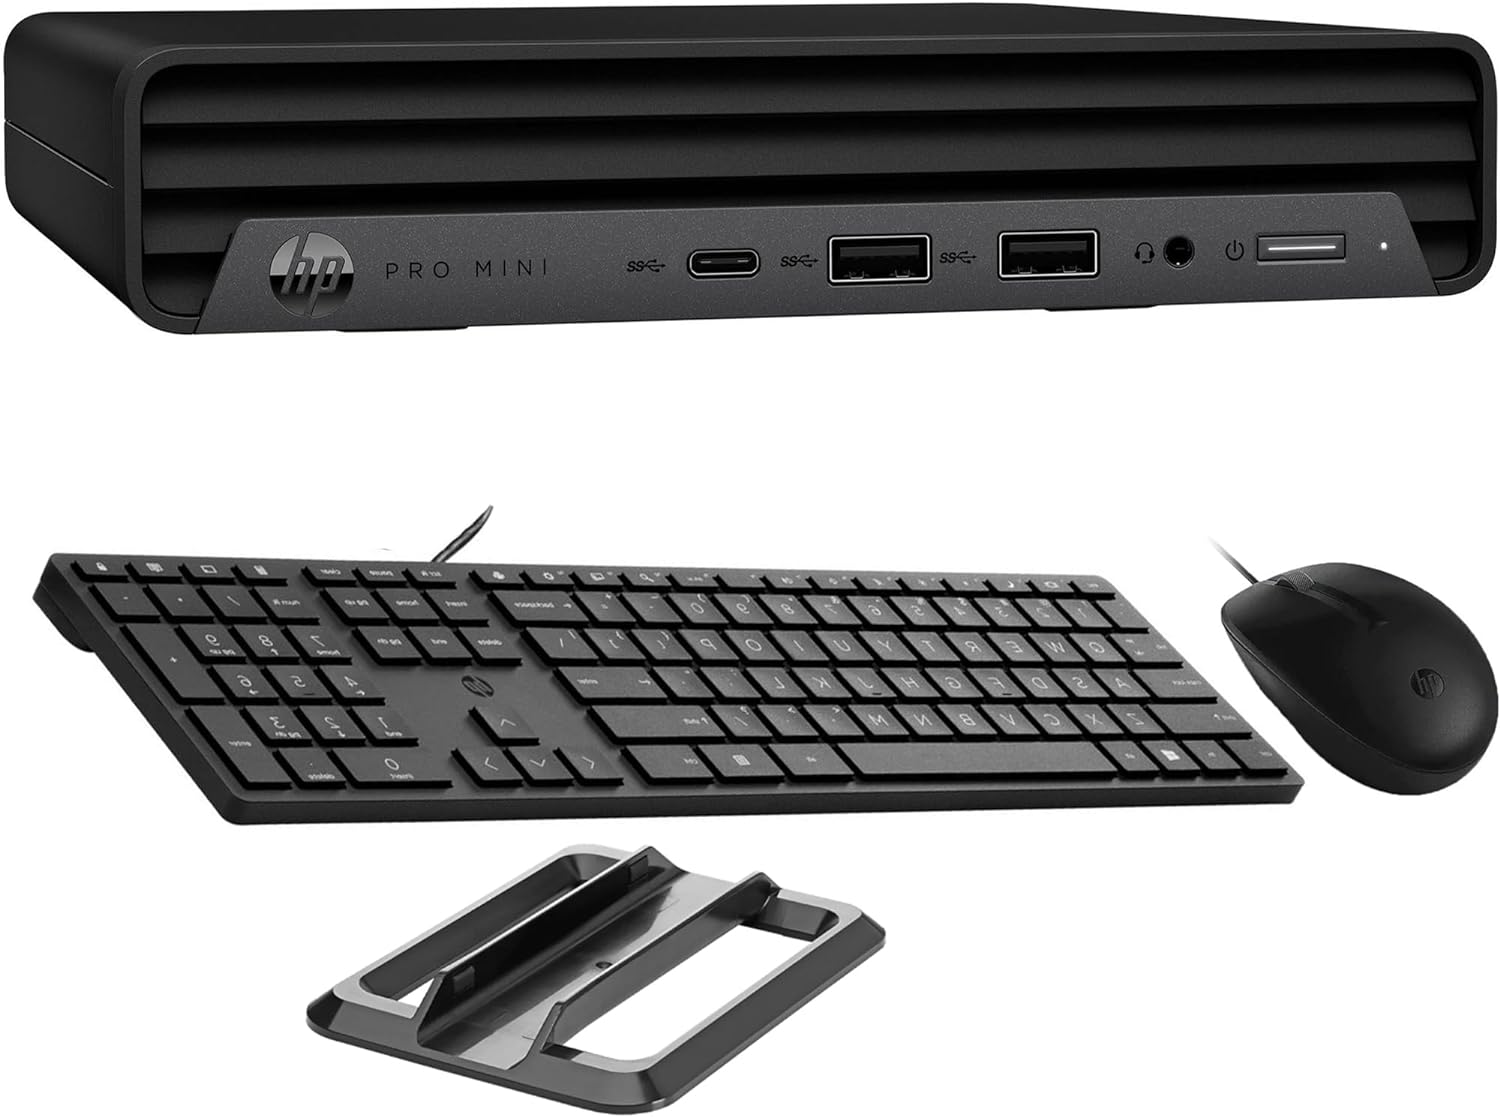 HP ProDesk 400 G9 Mini PC Business Desktop Computer, Intel 12-Core i7-12700T up to 4.7GHz, 64GB DDR4 RAM, 1TB PCIe SSD, WiFi 6, Bluetooth 5.2, Keyboard and Mouse, Windows 11 Pro